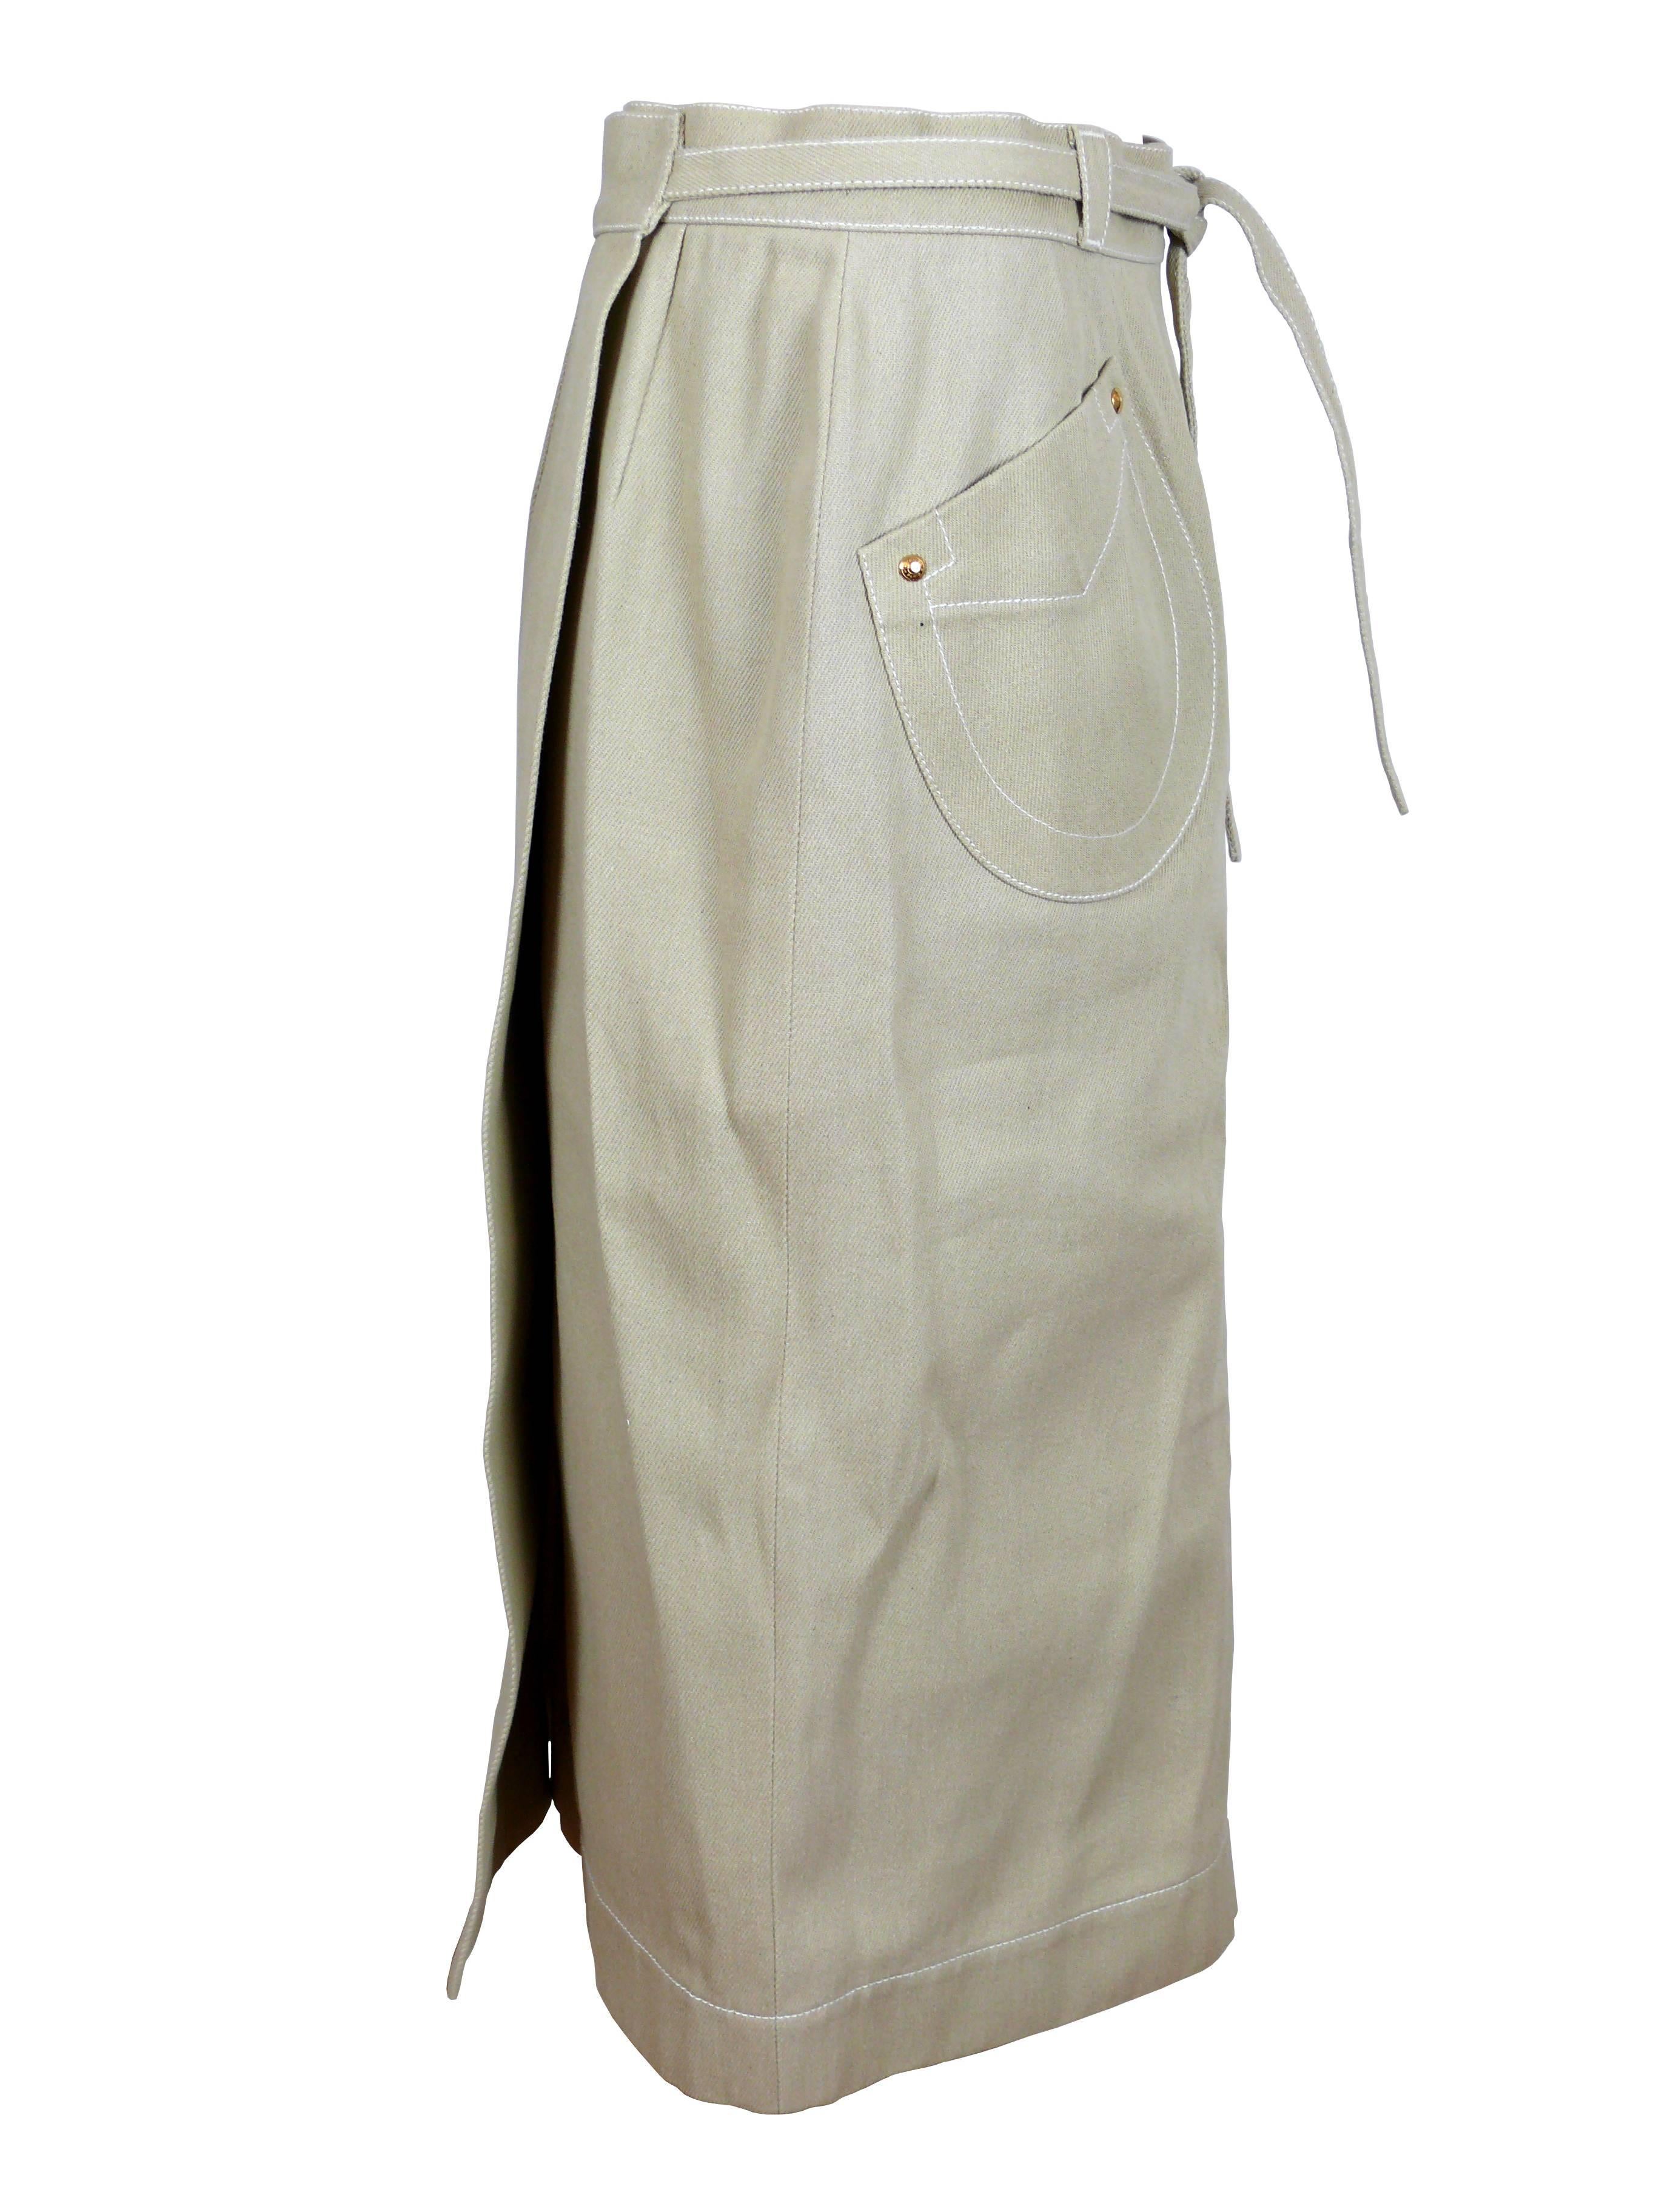 HERMES Paris wrap around natural cotton skirt.

Skirt attached with two buttons hidden in the waistband and a belt.
Two large asymetrical front pockets with white saddle stitch detail and gold tone 